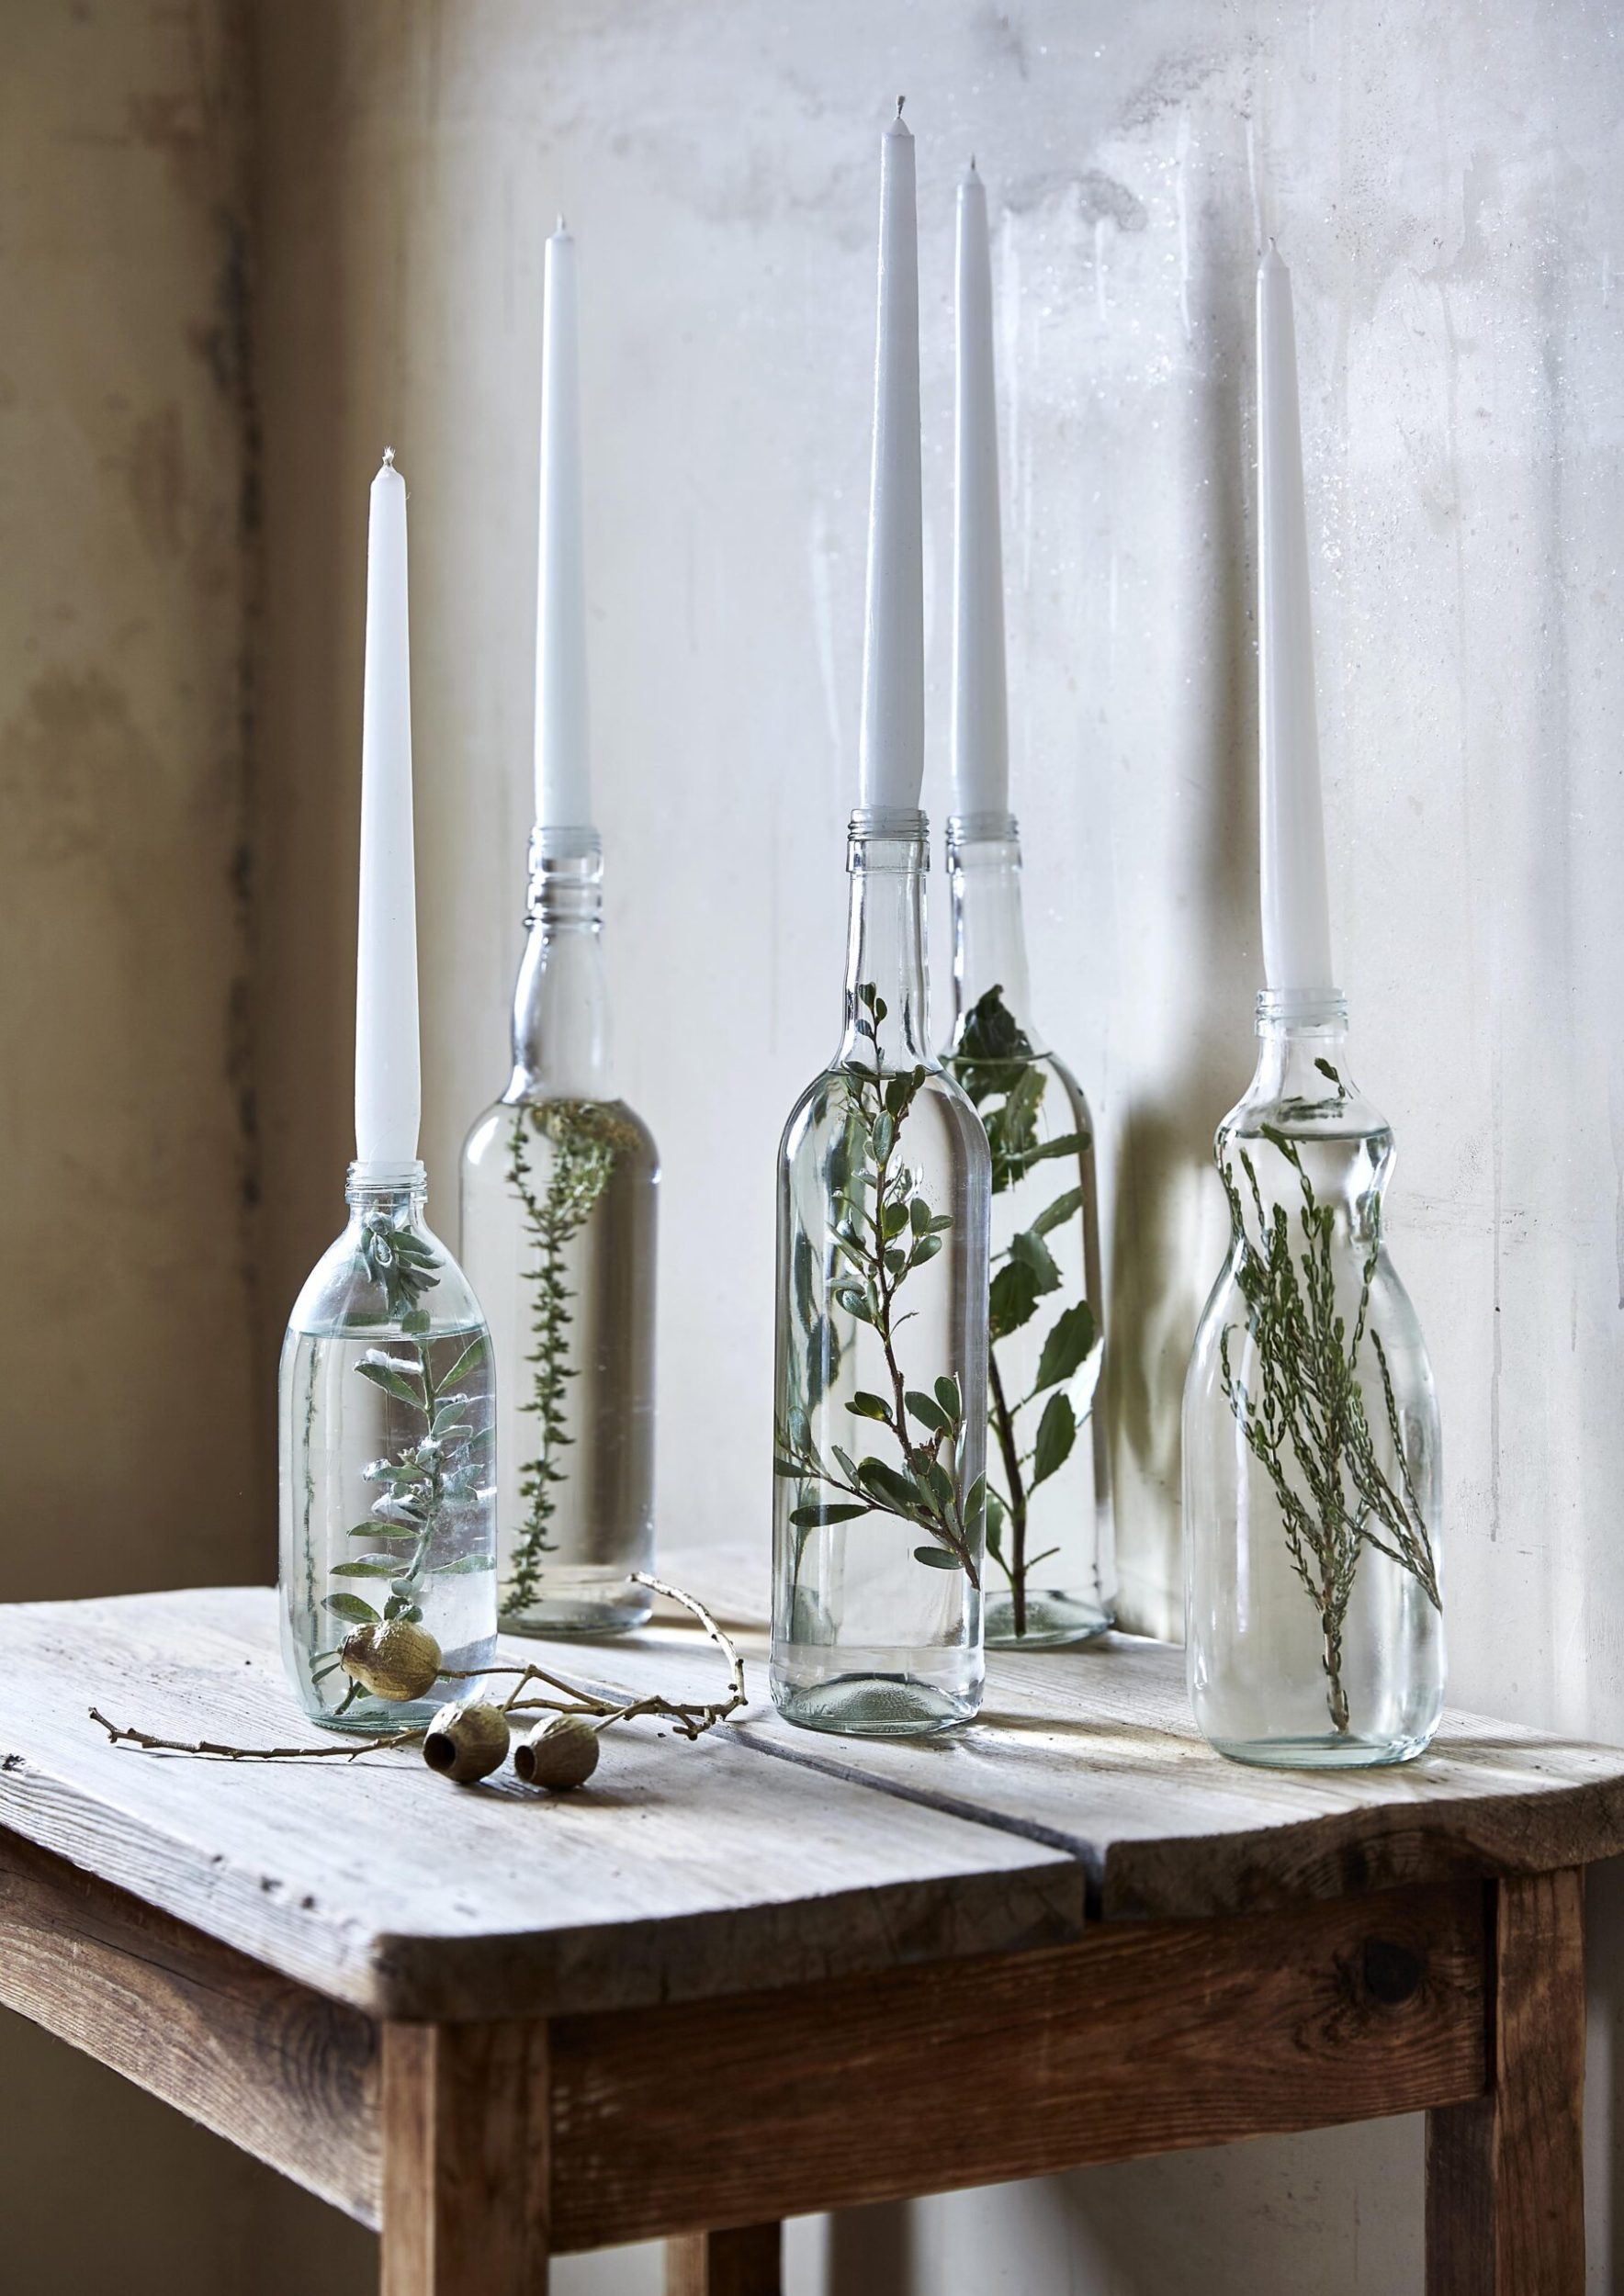 Clear glass bottles filled with water and greenery then with candles from the opening